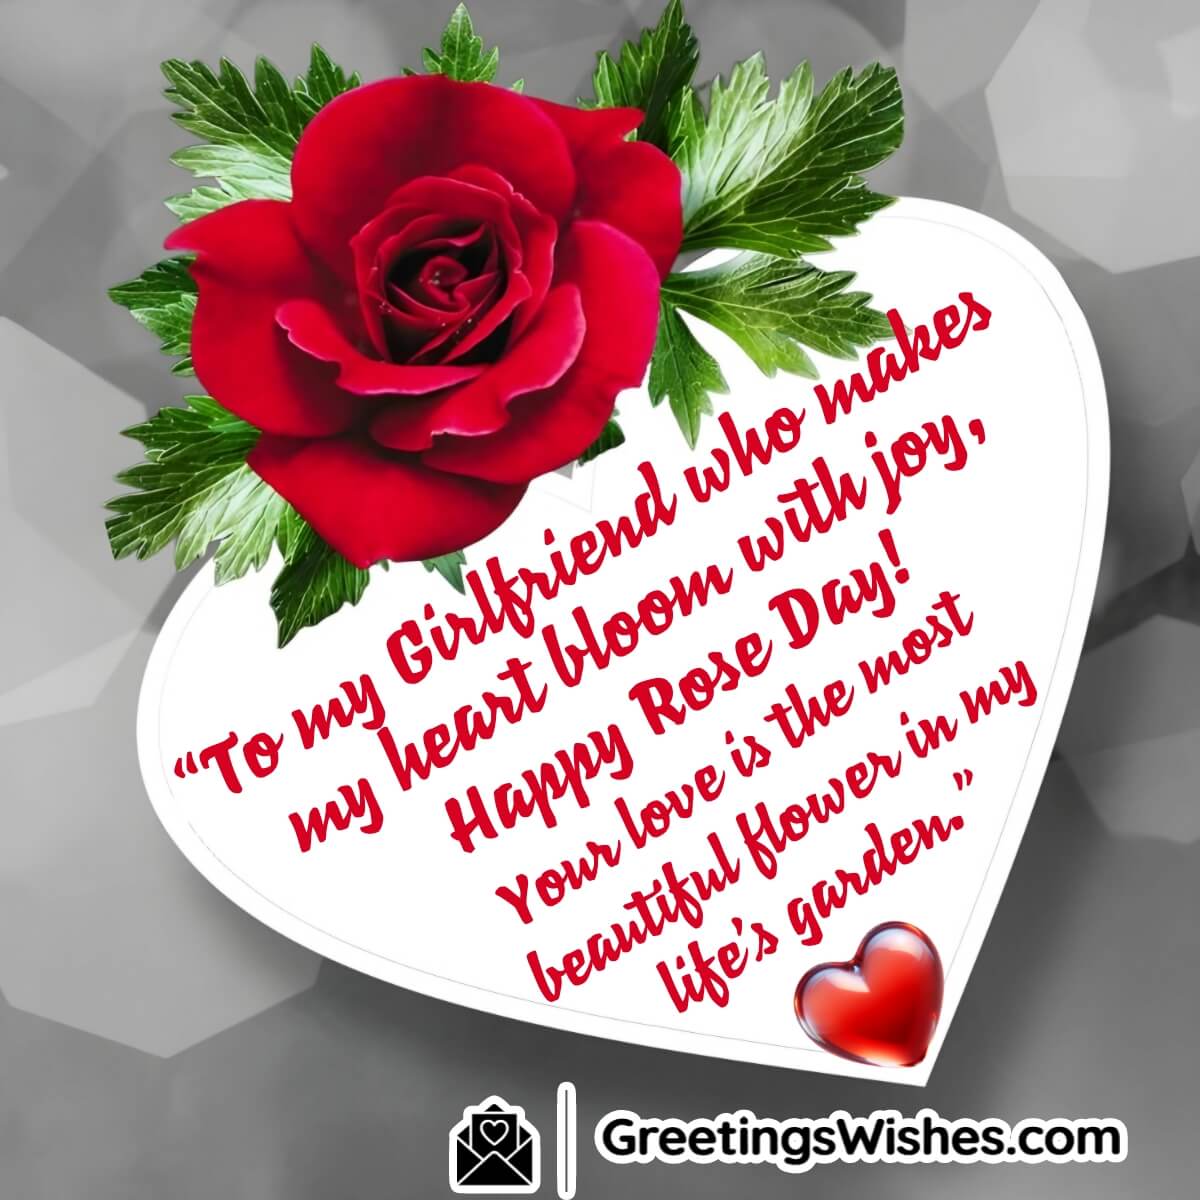 Rose Day Wishes For Girlfriend